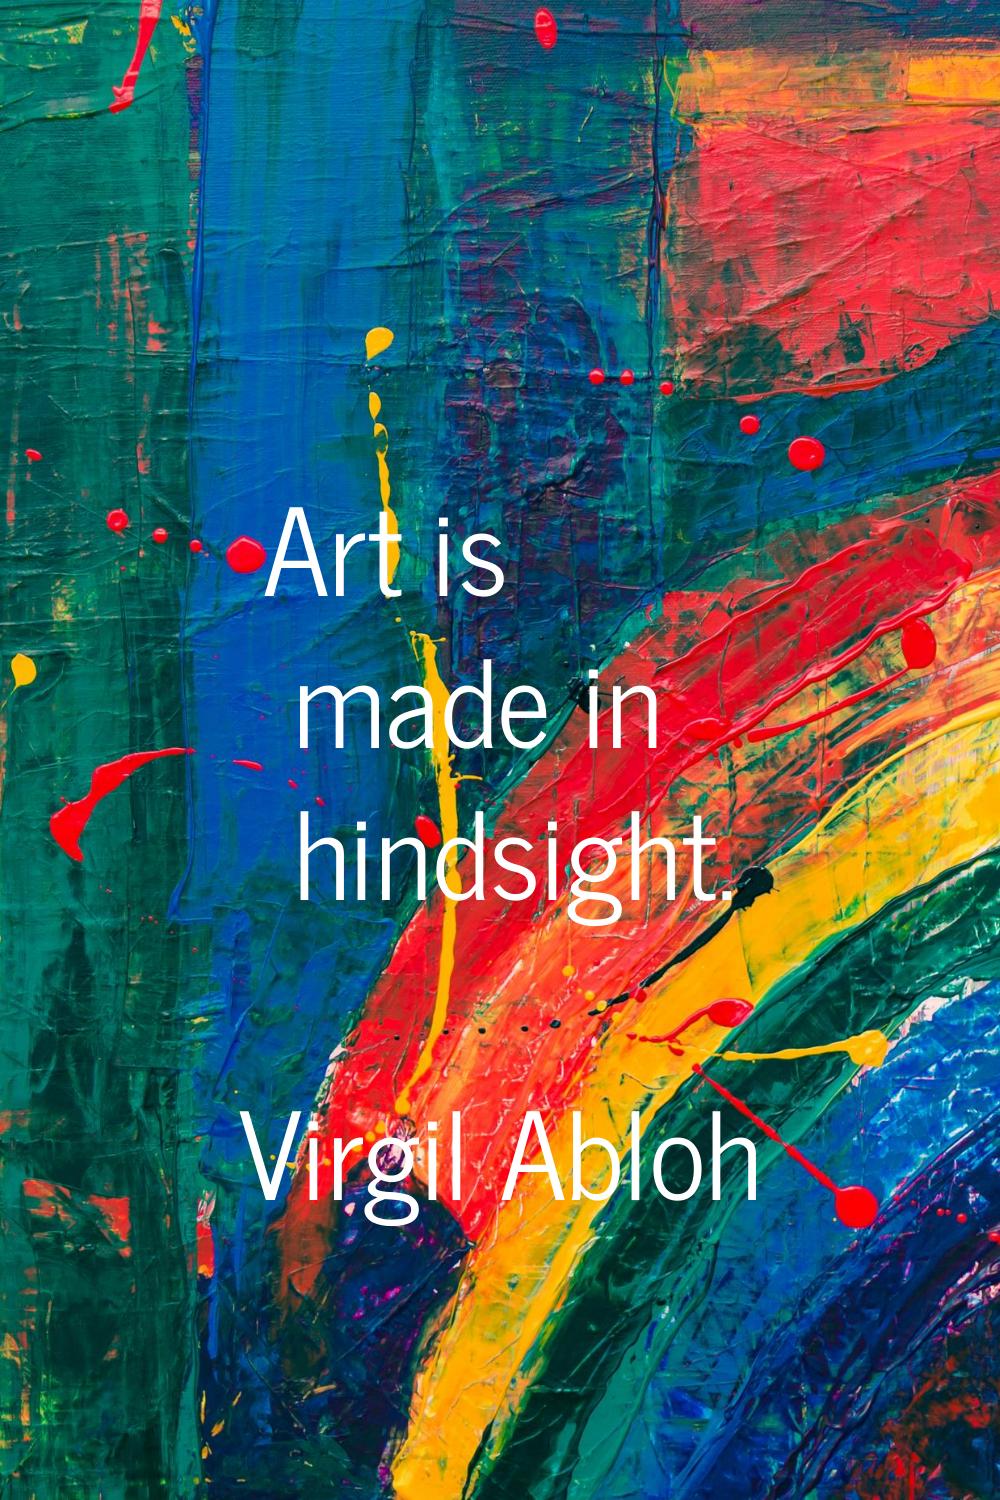 Art is made in hindsight.